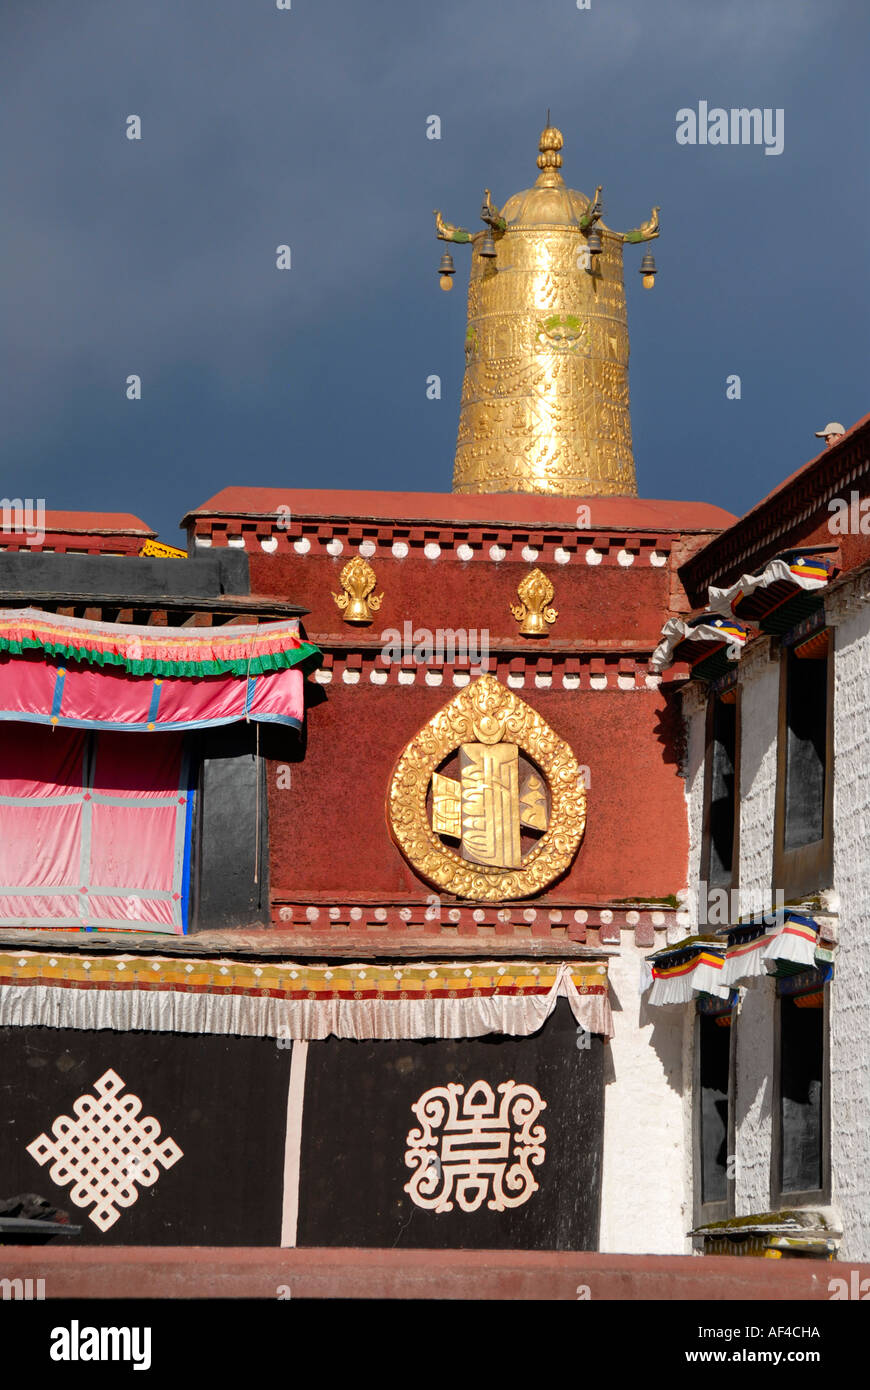 Tibetan symbols endless knot and turret in gold above the main entrance of the Jokhang Temple Lhasa Tibet China Stock Photo